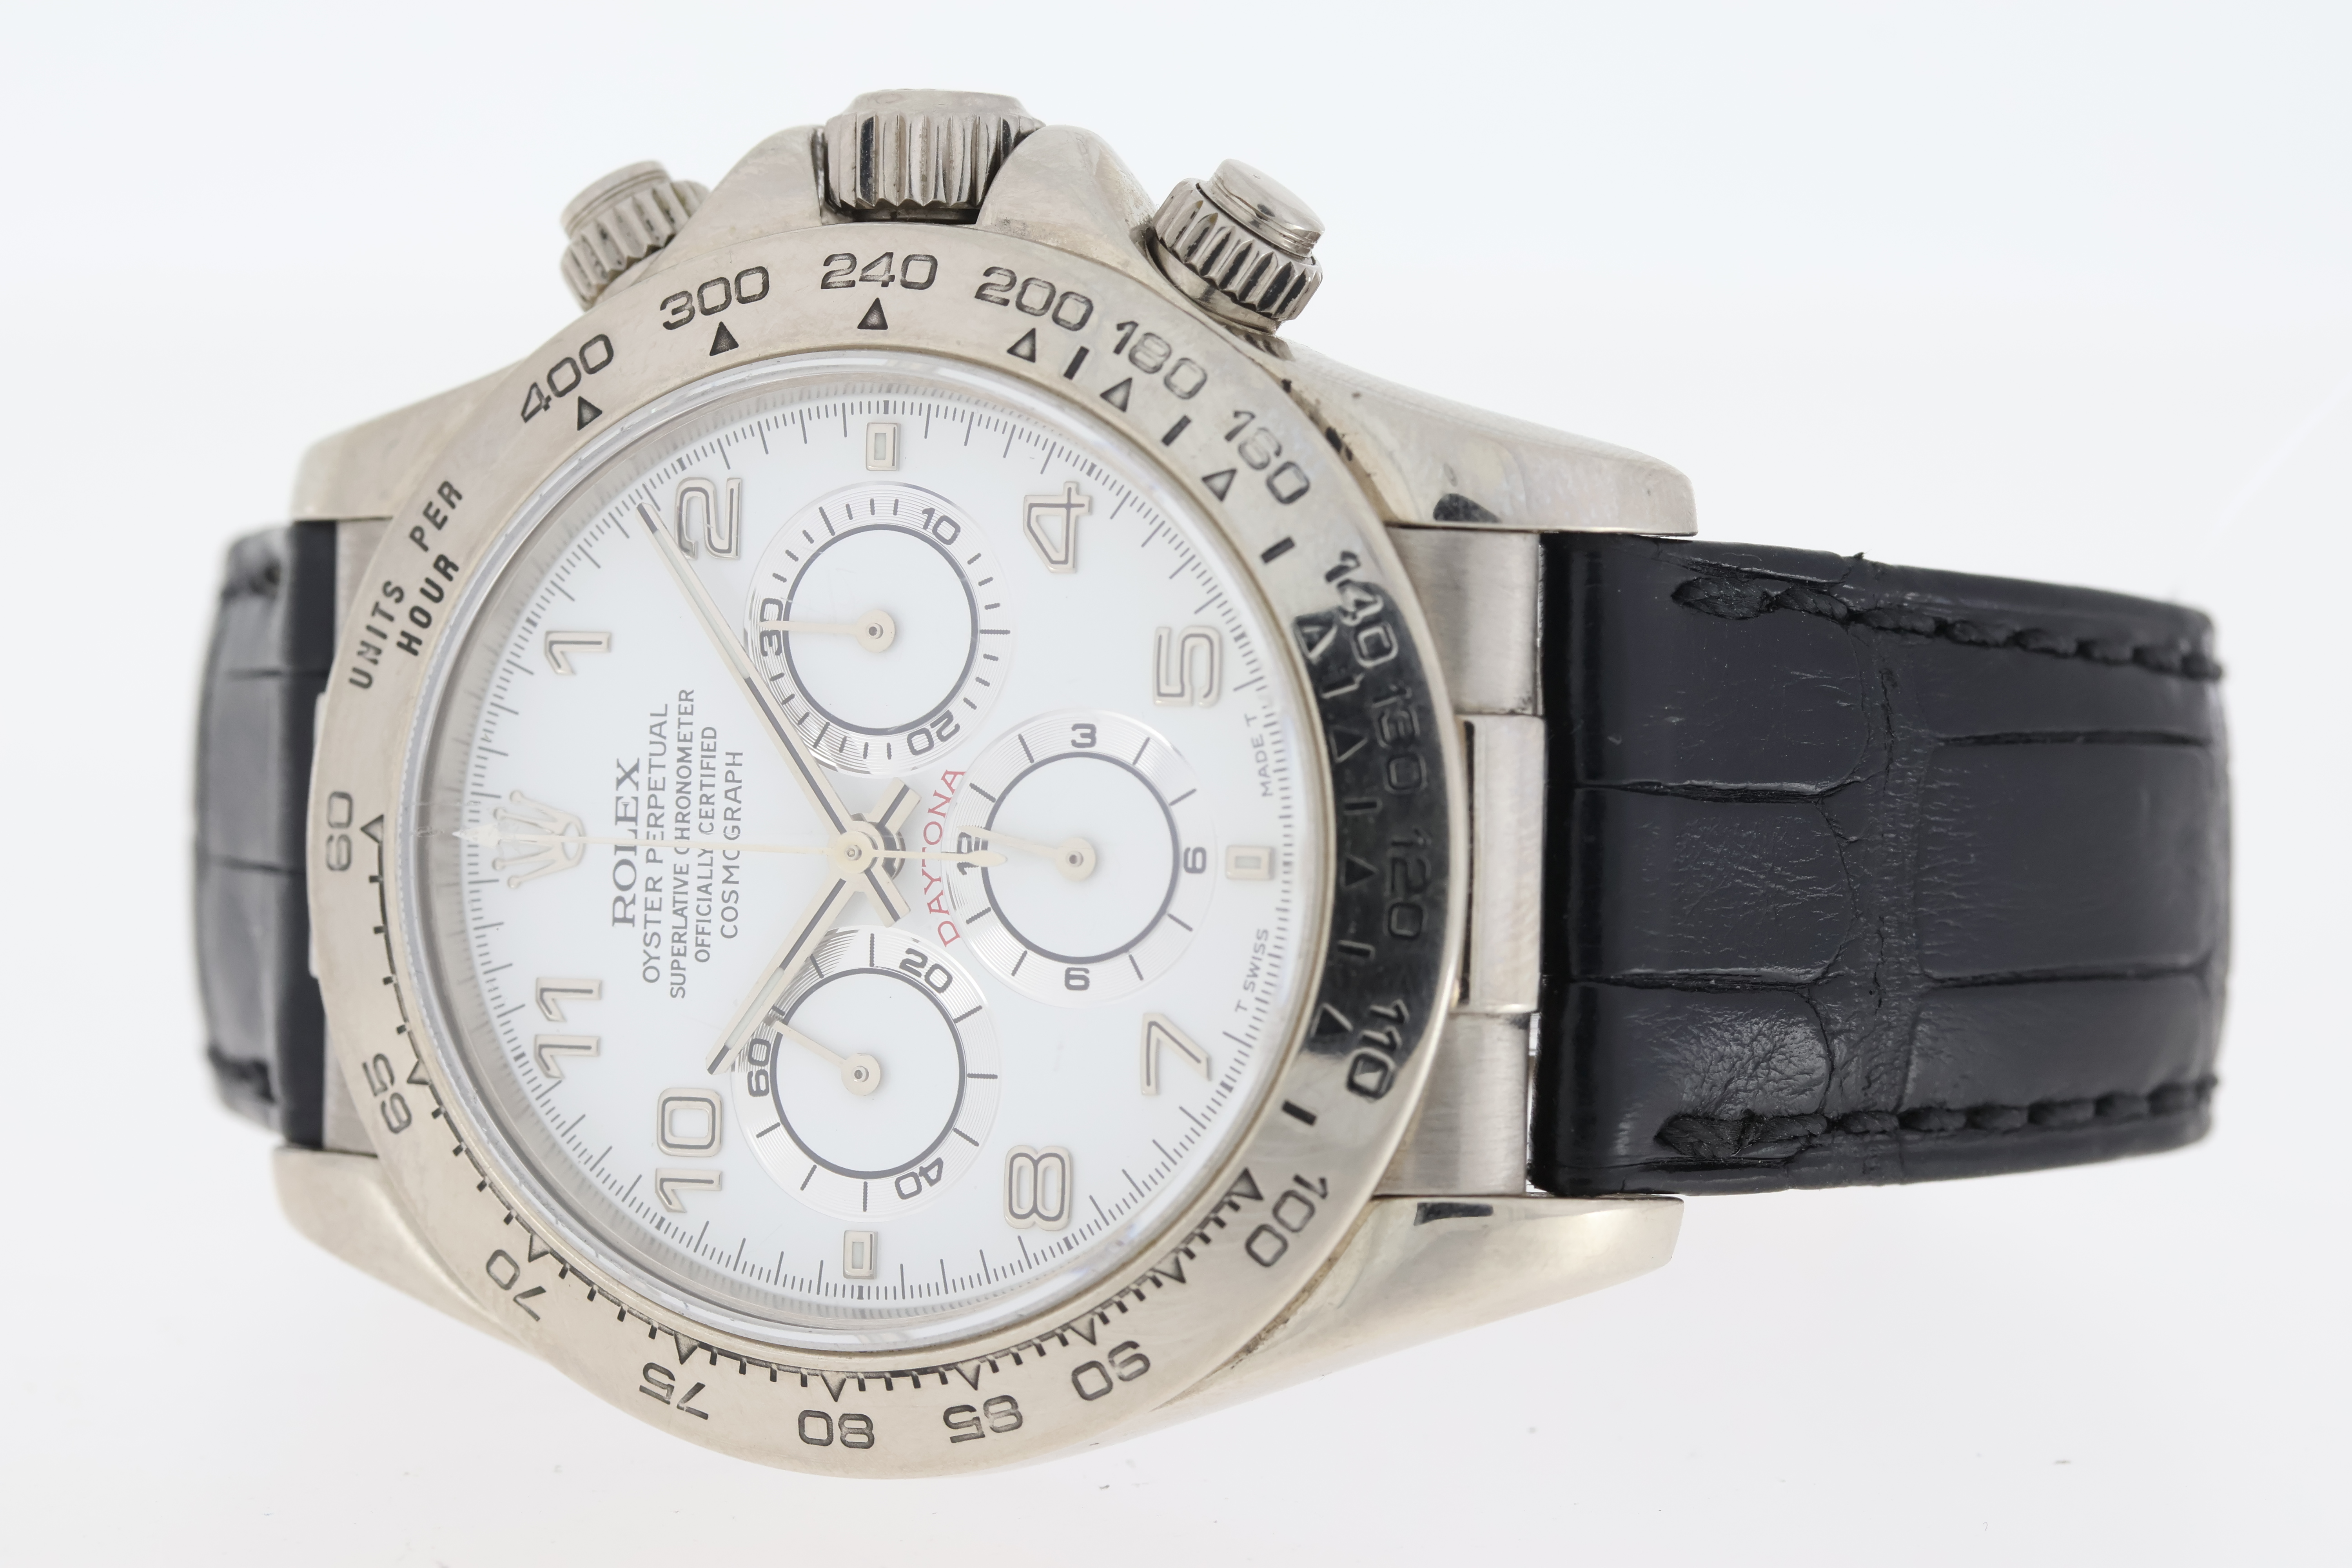 18ct Rolex Daytona 'Zenith' White Gold Reference 16519 with Box - Image 3 of 5